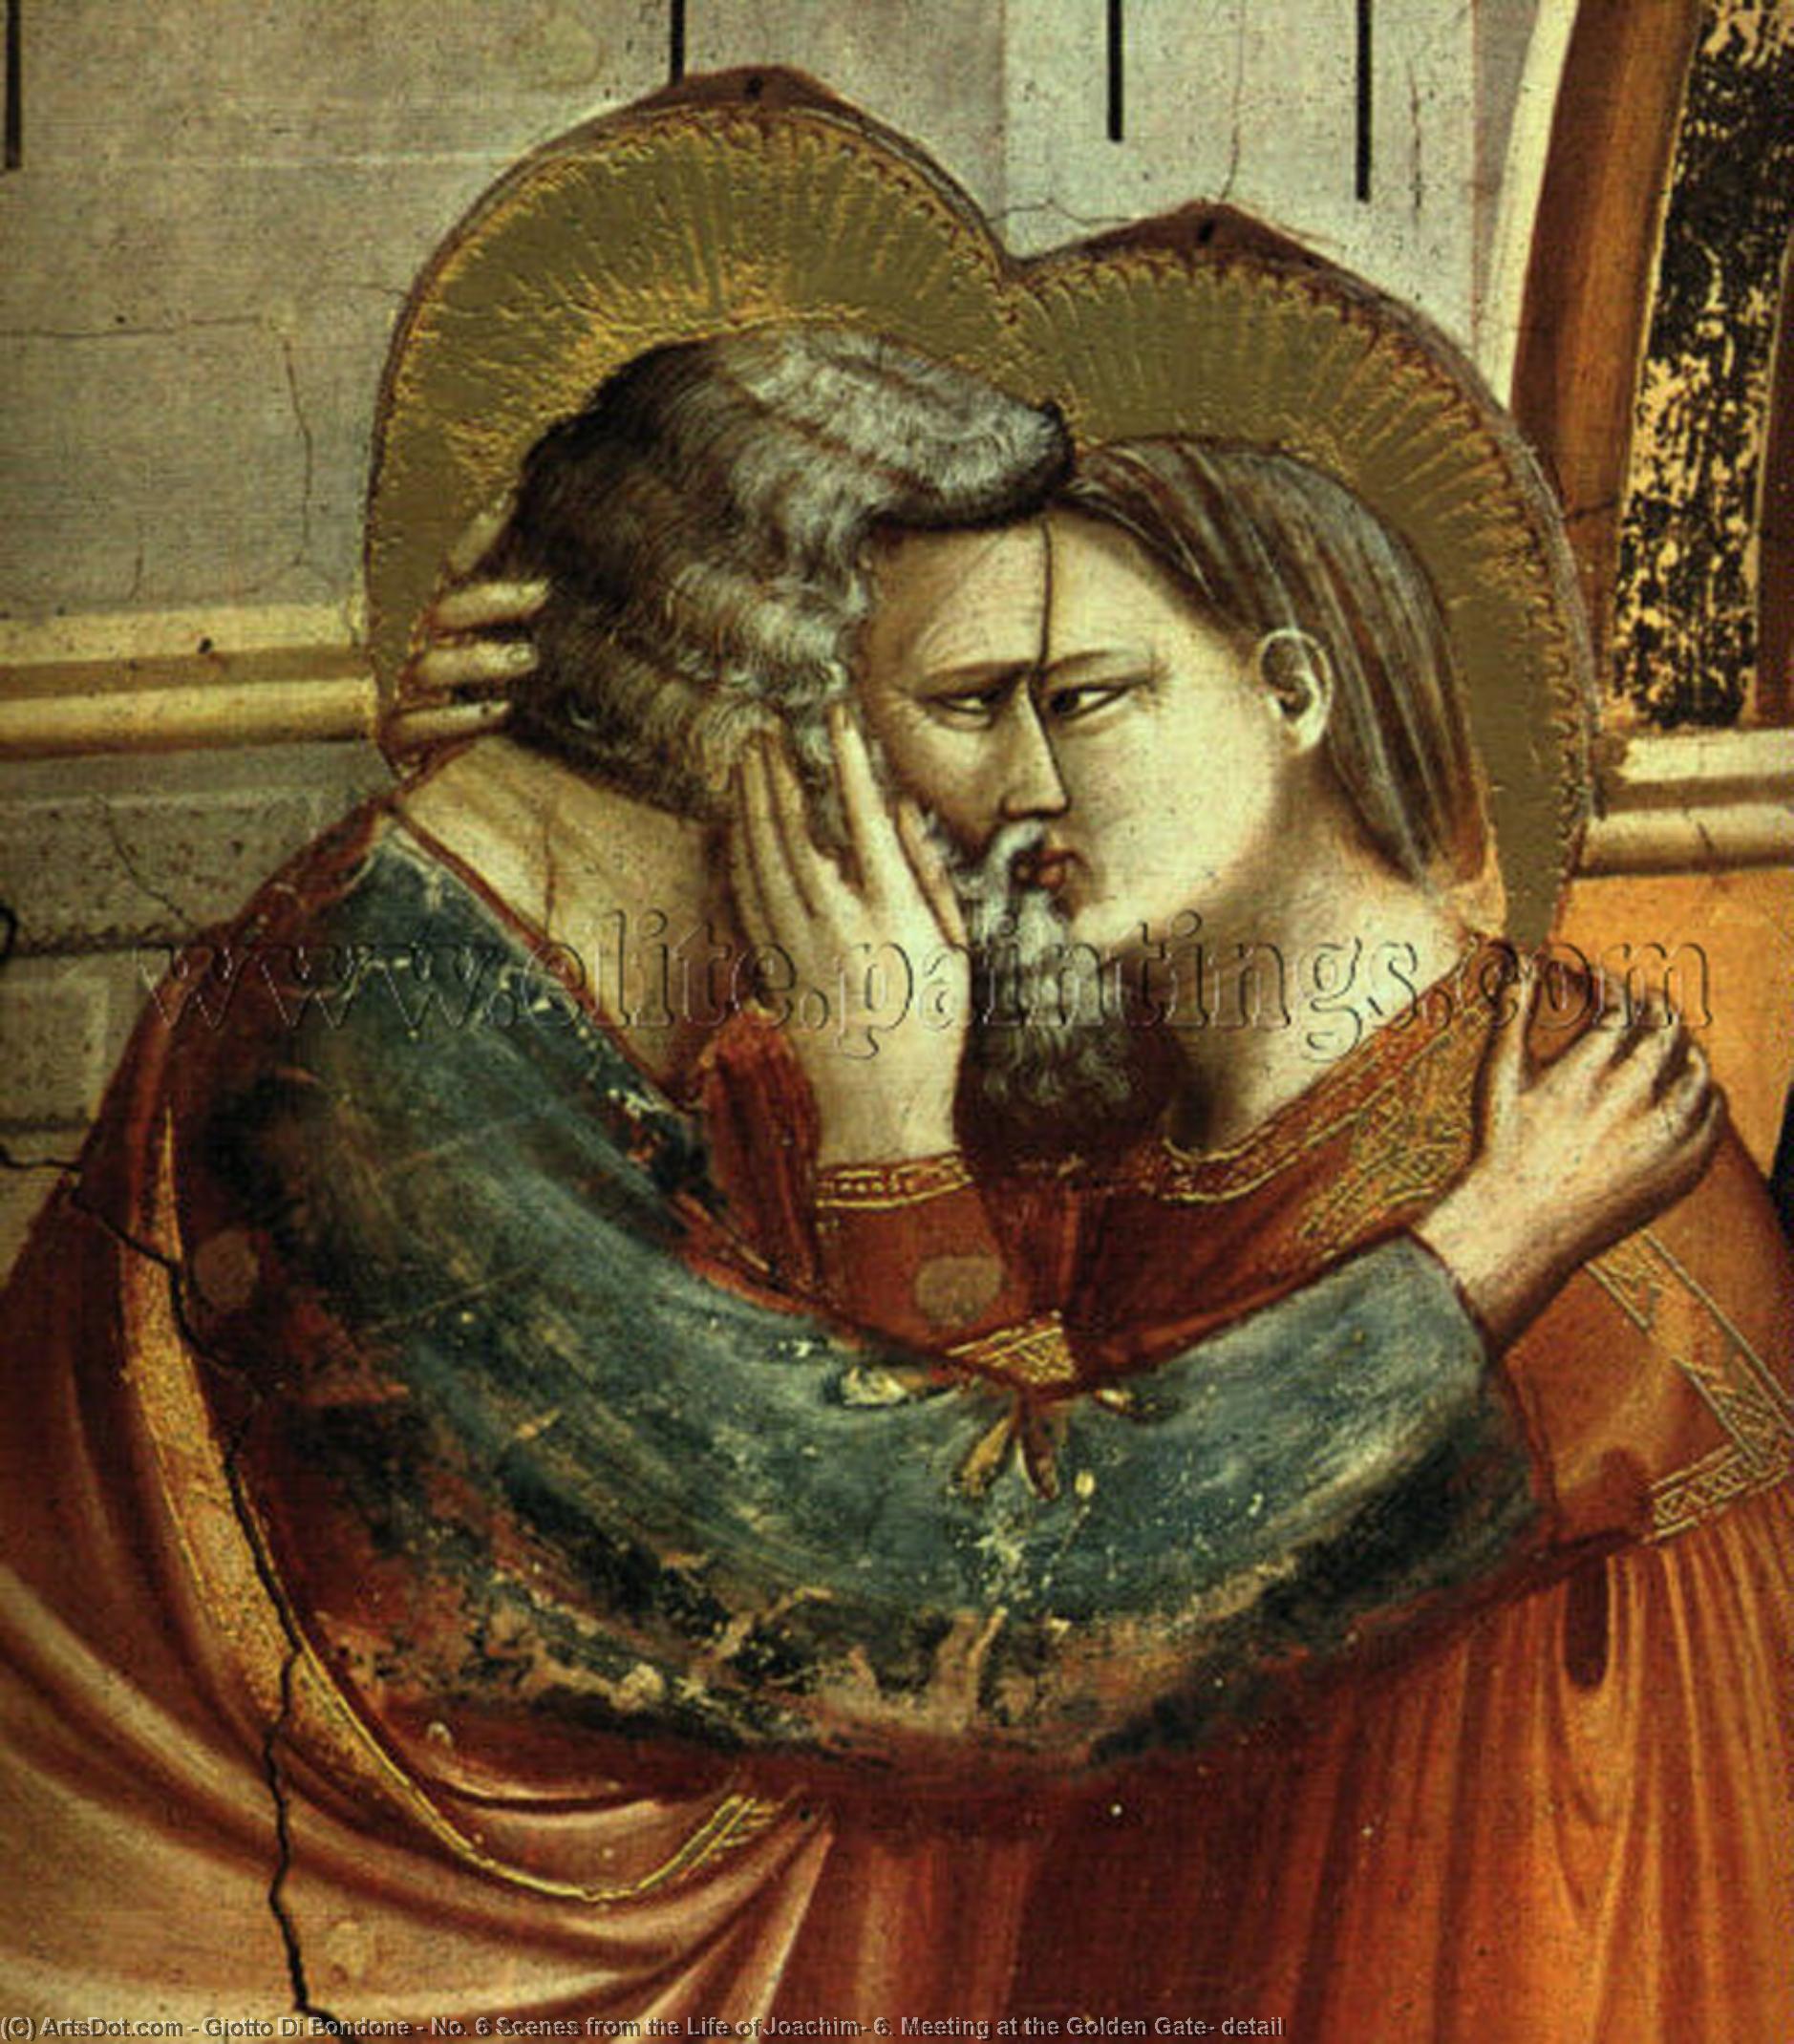 WikiOO.org - Encyclopedia of Fine Arts - Lukisan, Artwork Giotto Di Bondone - No. 6 Scenes from the Life of Joachim: 6. Meeting at the Golden Gate, detail